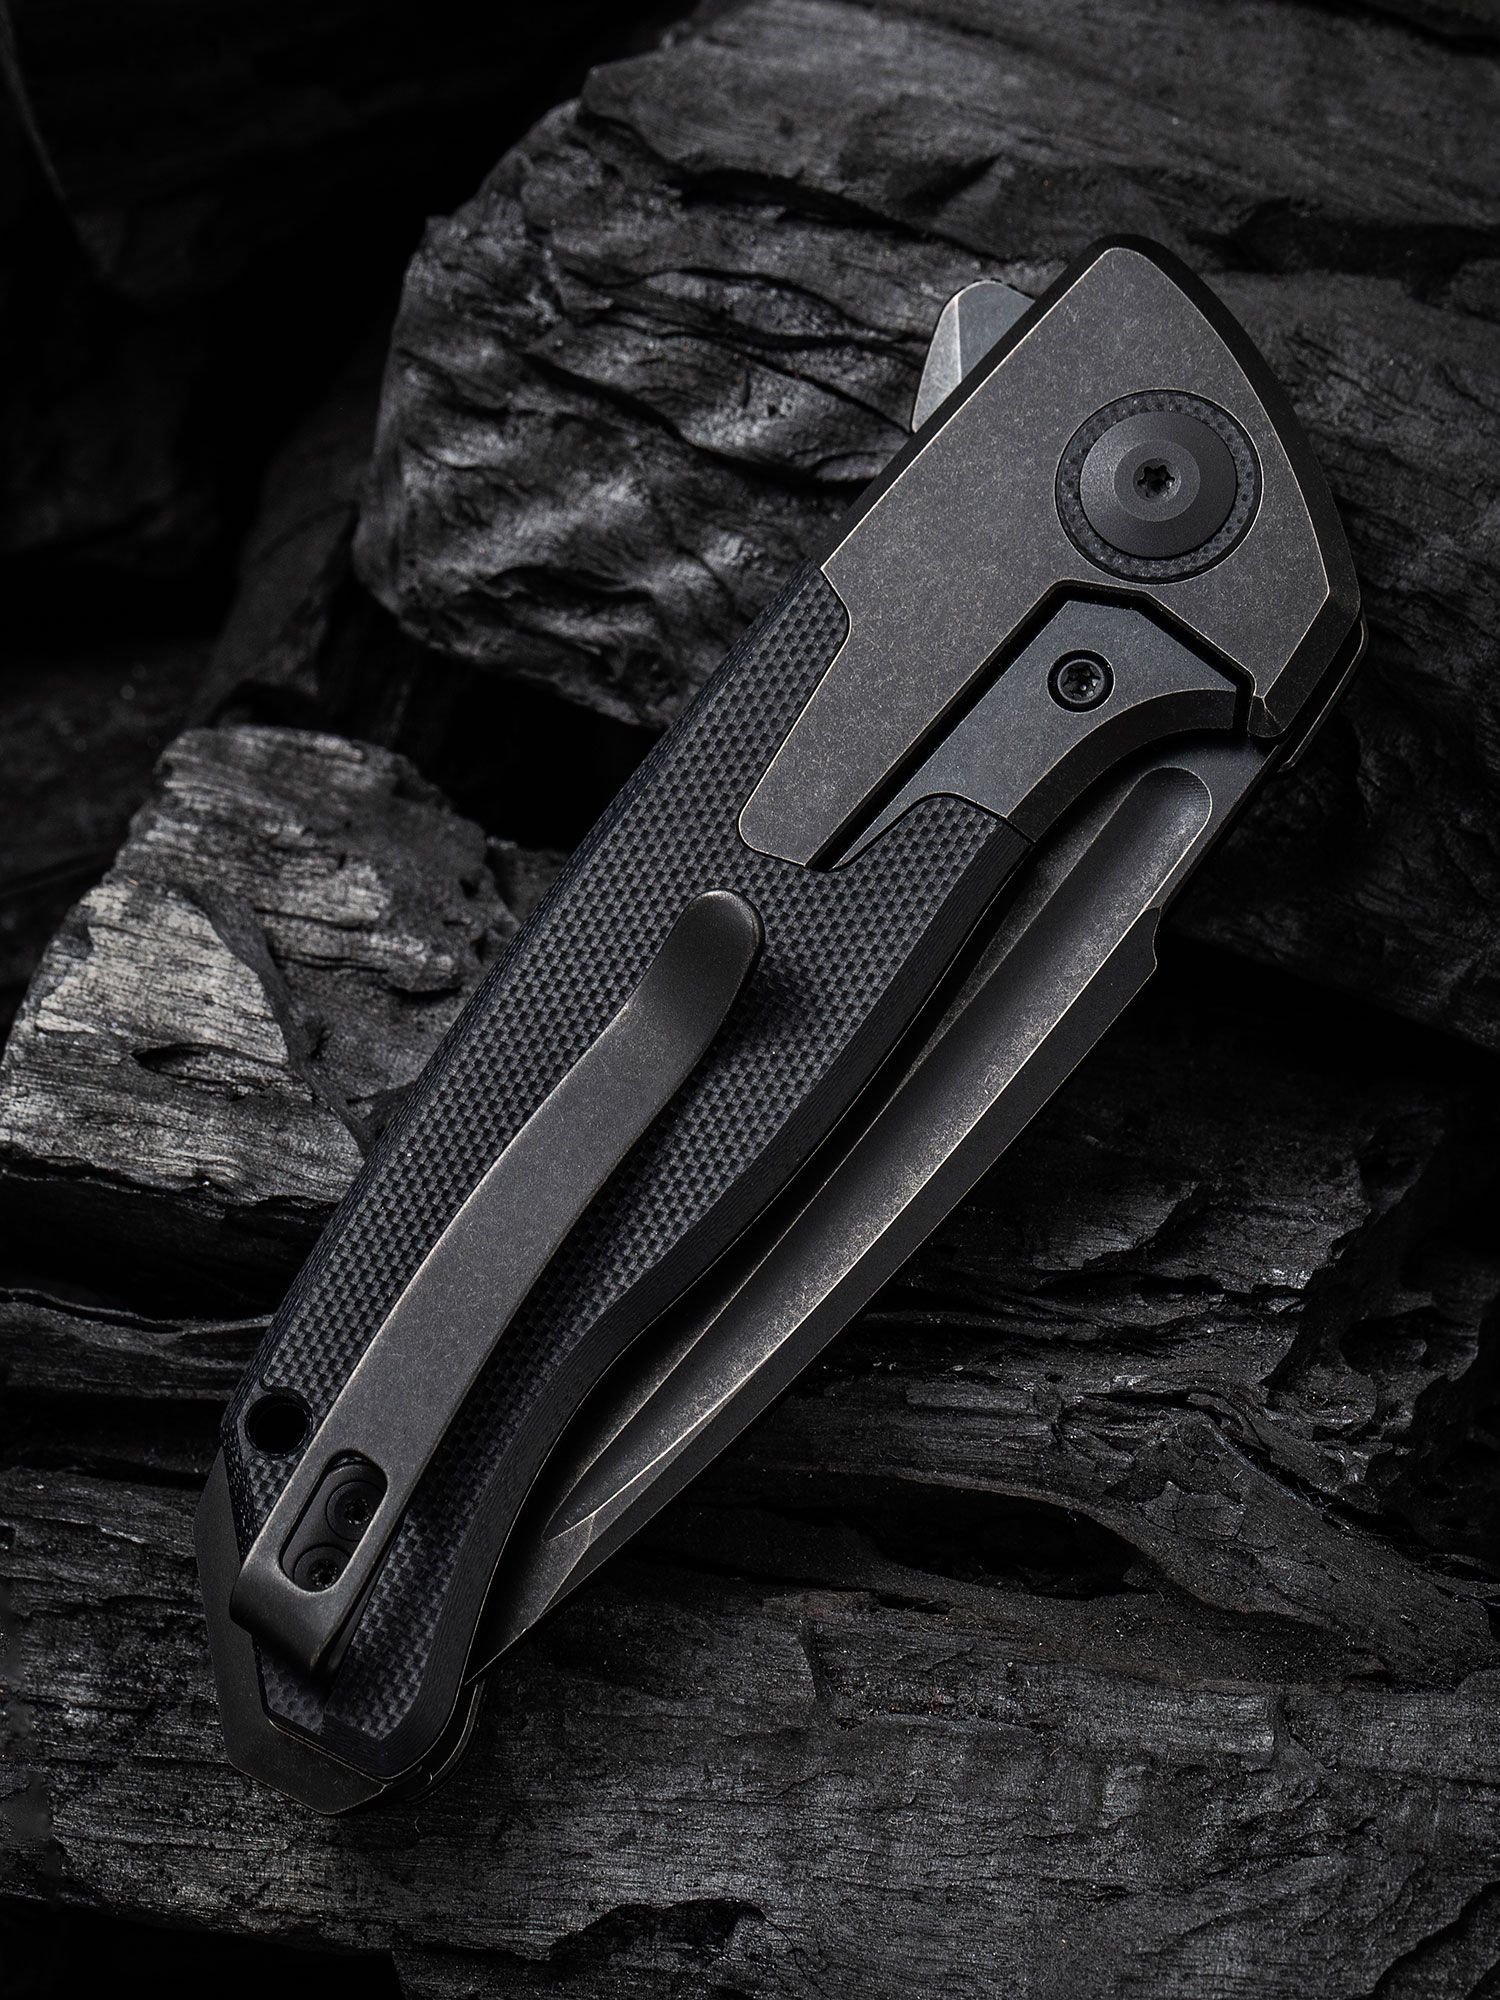 We Knife Company Snick Flipper Knife 3.47 CPM-20CV Black Stonewashed  Blade, Black Titanium Handles with Cuibourtia Wood Inlays - KnifeCenter -  WE19022F-3